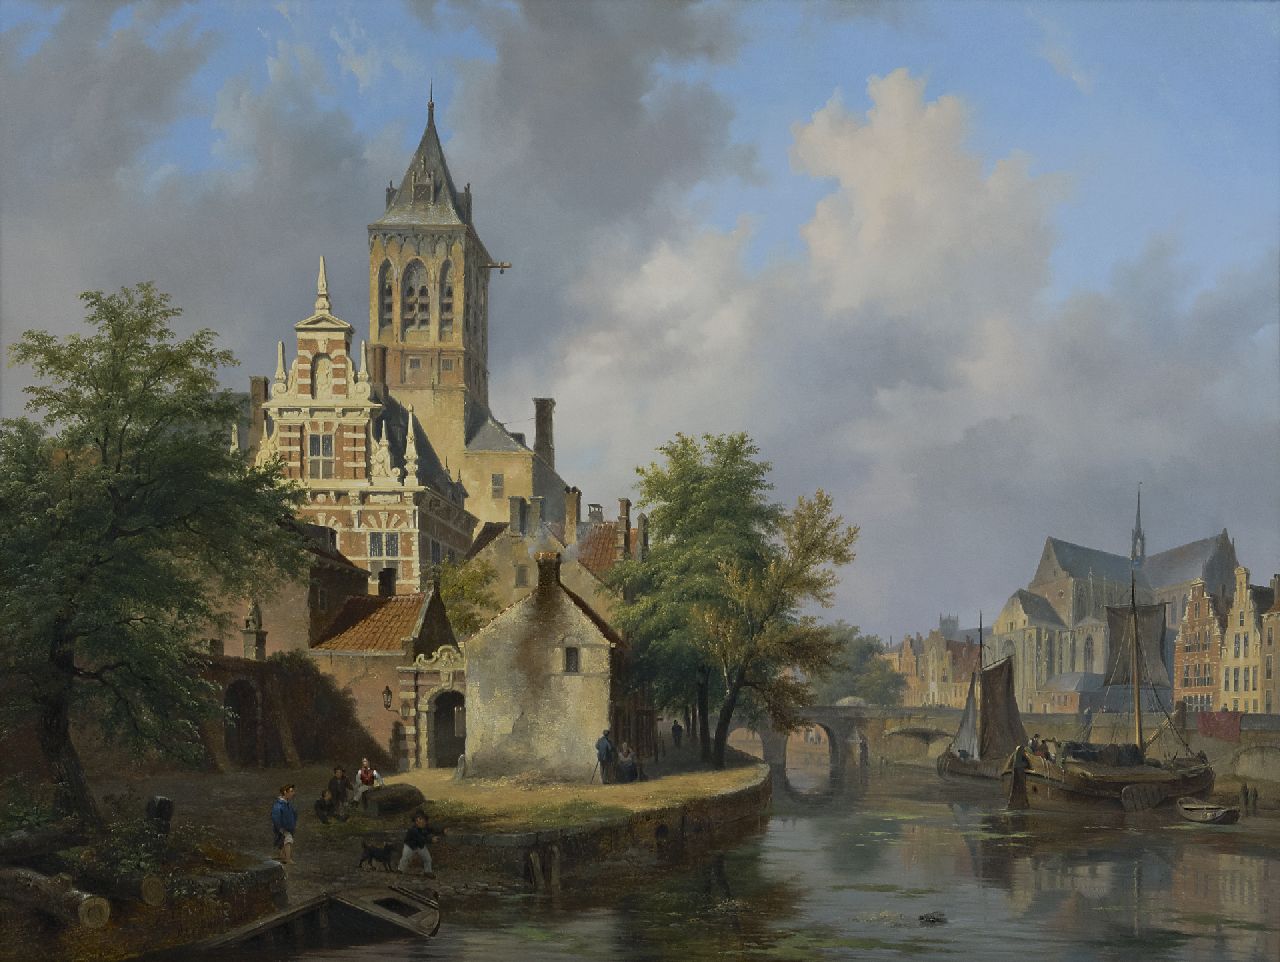 Hove B.J. van | Bartholomeus Johannes 'Bart' van Hove | Paintings offered for sale | A sunny townview, oil on panel 61.7 x 82.5 cm, signed l.l. and dated 1840